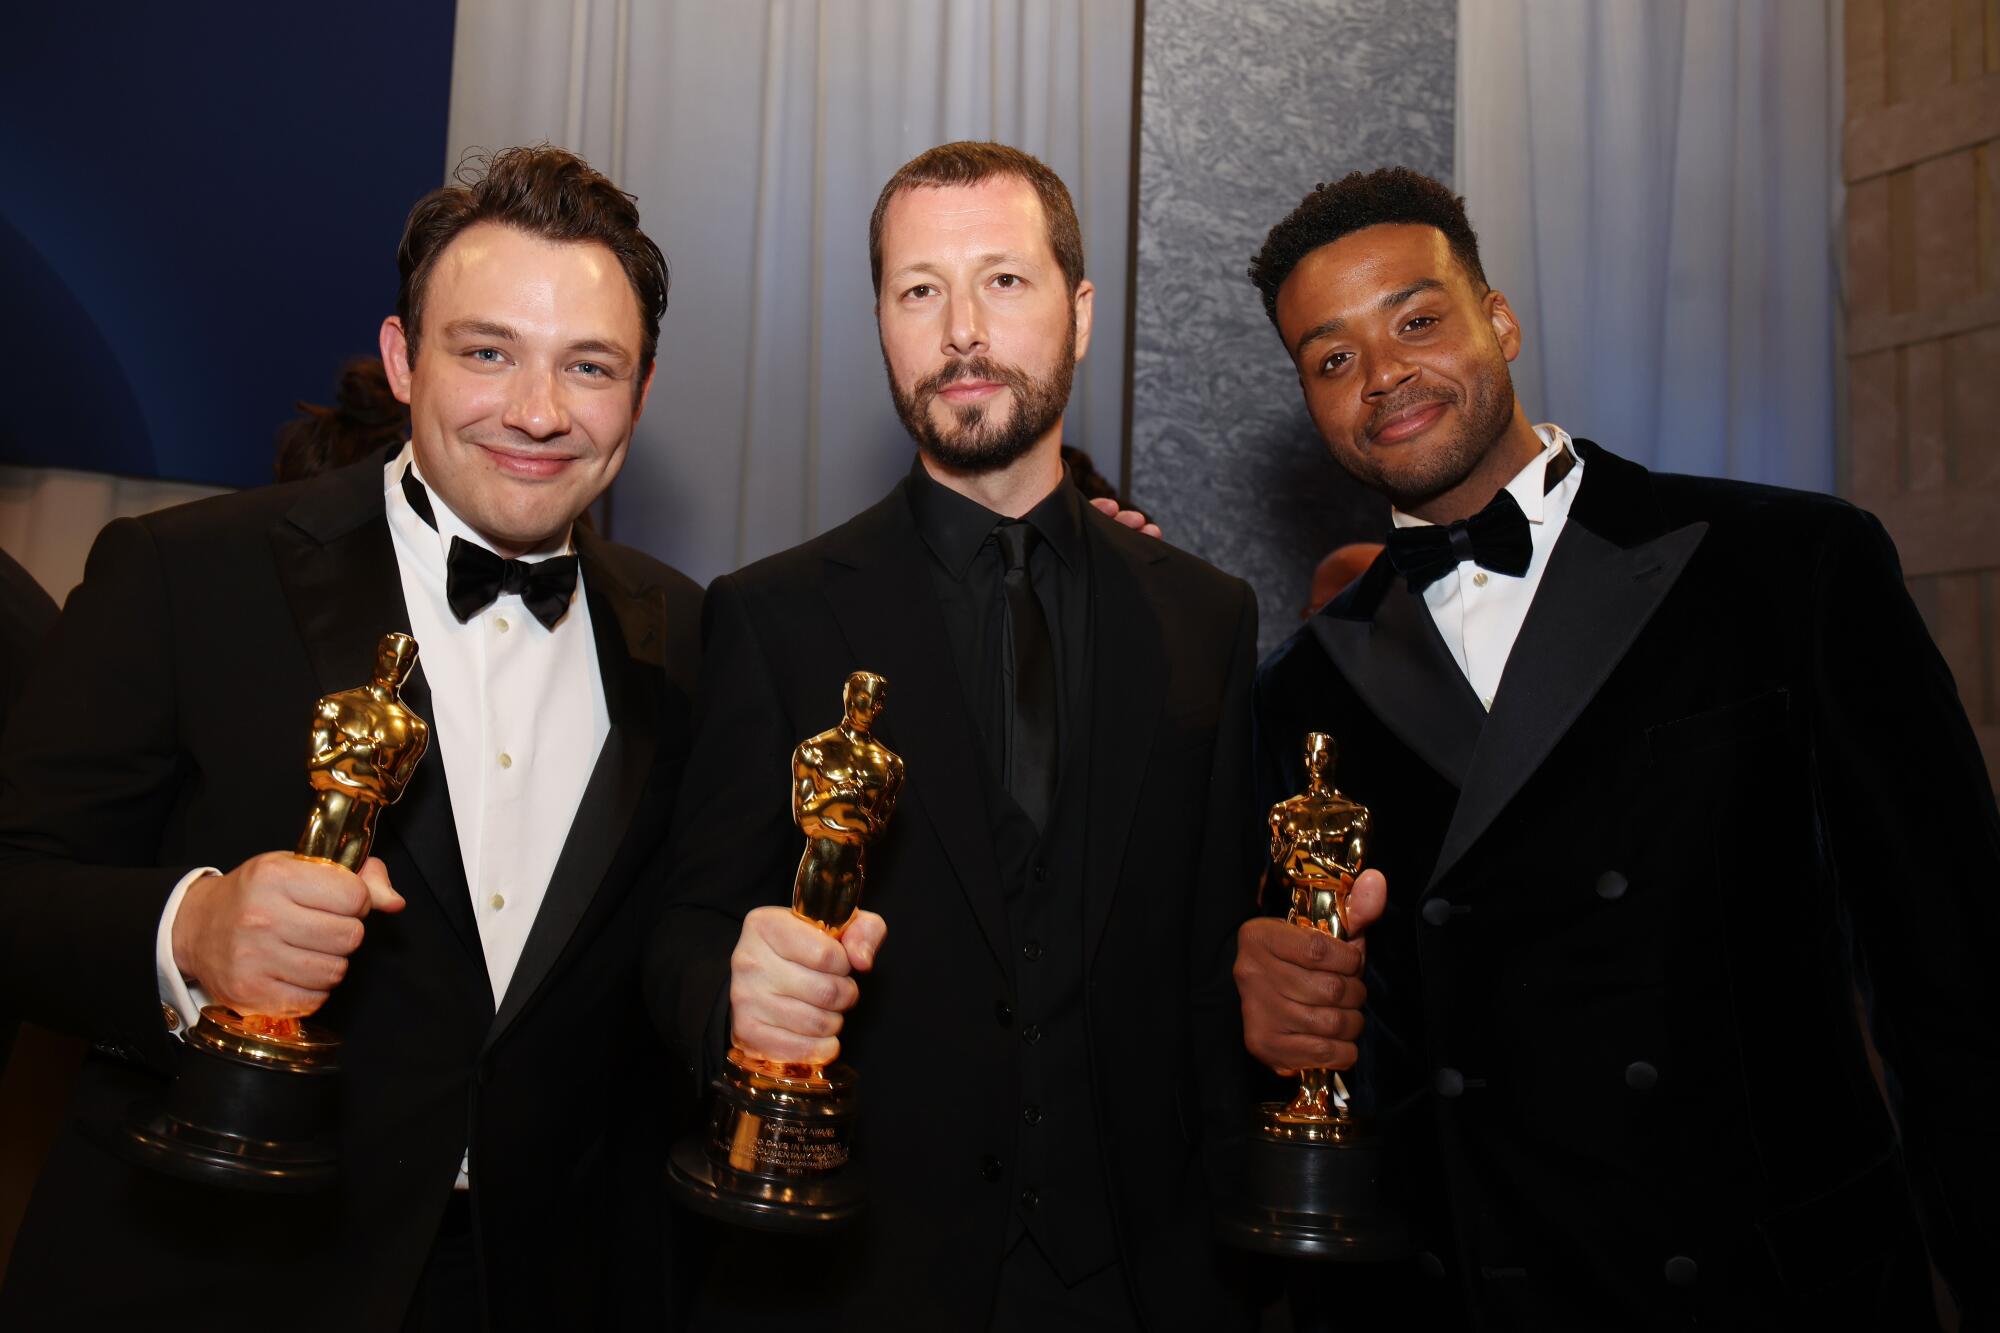 Three men holding Oscars smile for the camera.